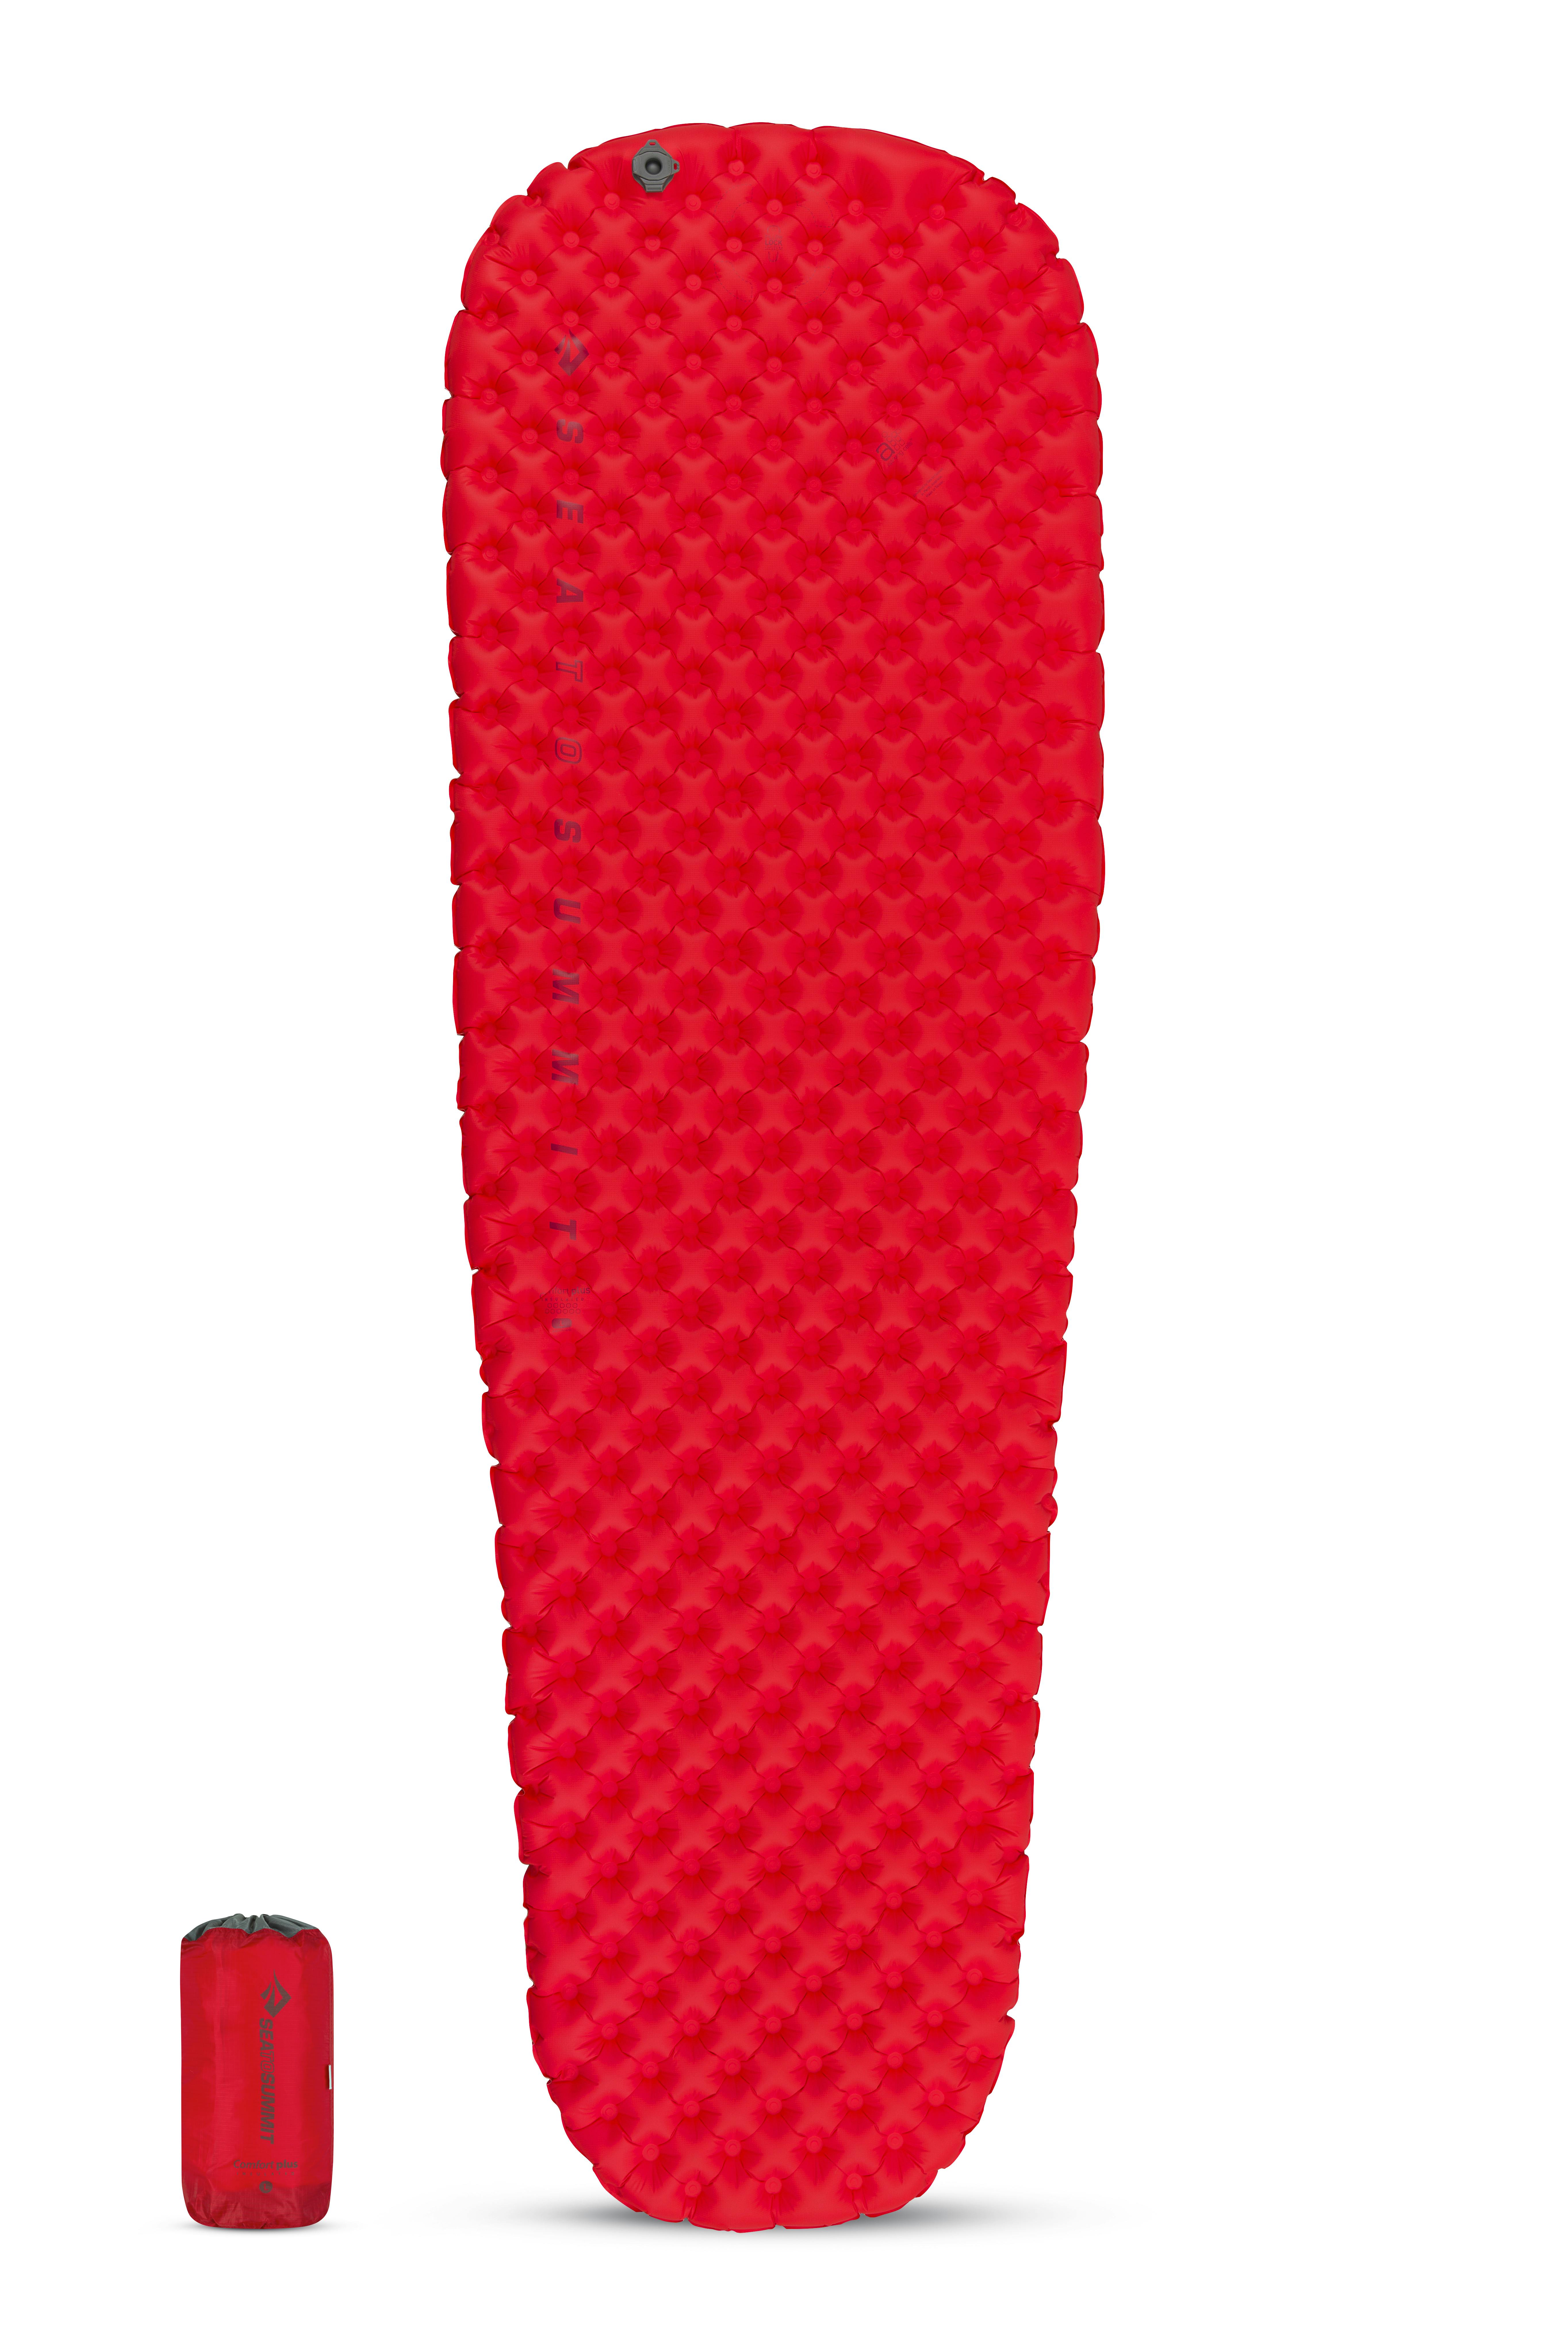 Sea To Summit Comfort Plus Insulated Sleeping Pad · Red